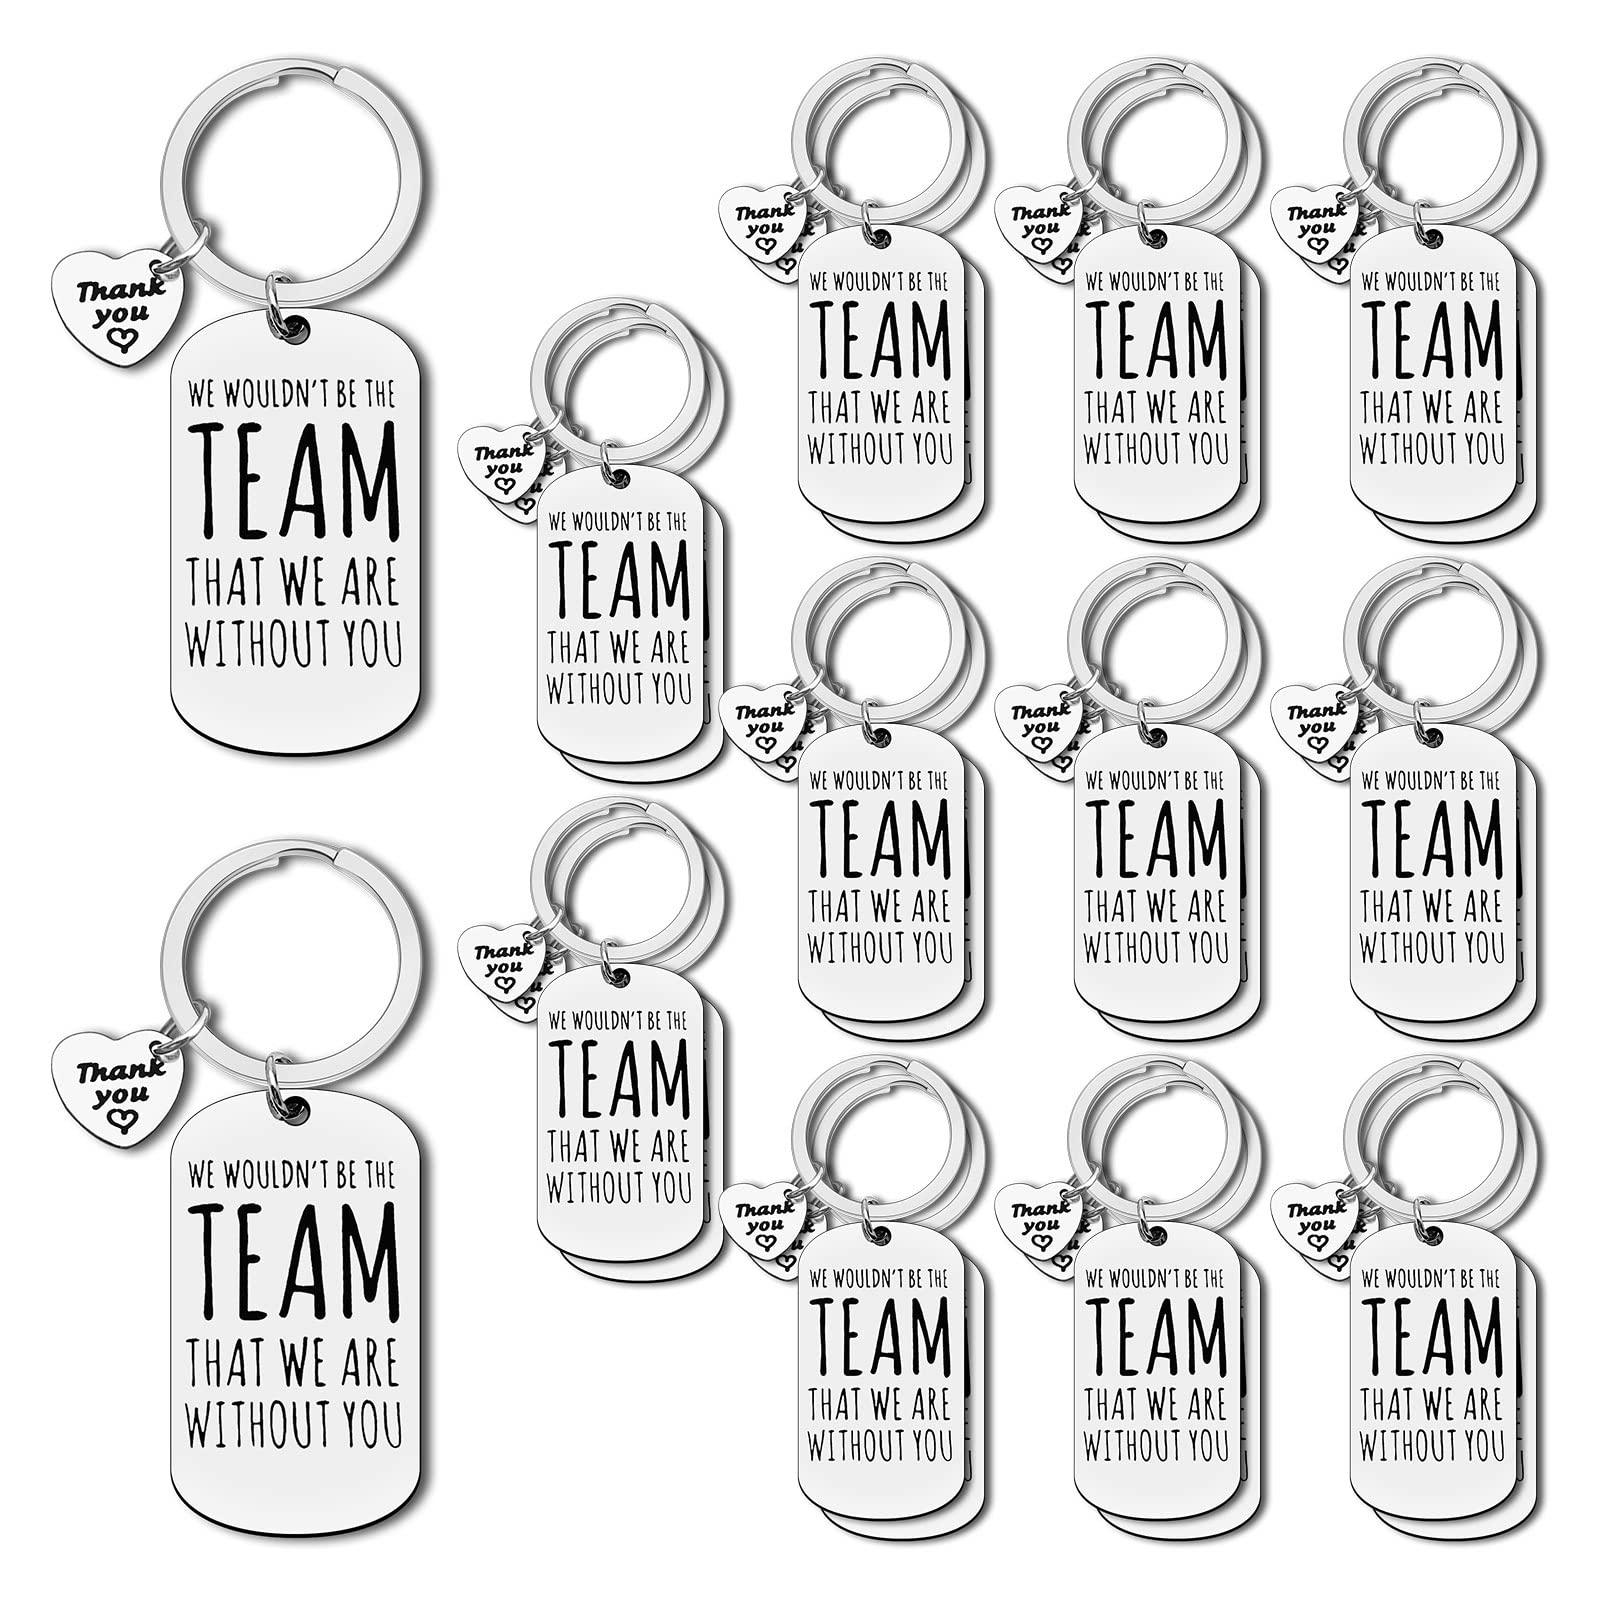 24Pcs Team Leader Keyring Appreciation Gifts for Boss Coach Thank You Gifts for Coworker Manager Team Mom Thank You Keychain for Team Coach Soccer Baseball Swimming Coach Sport Leader Going Away Gift